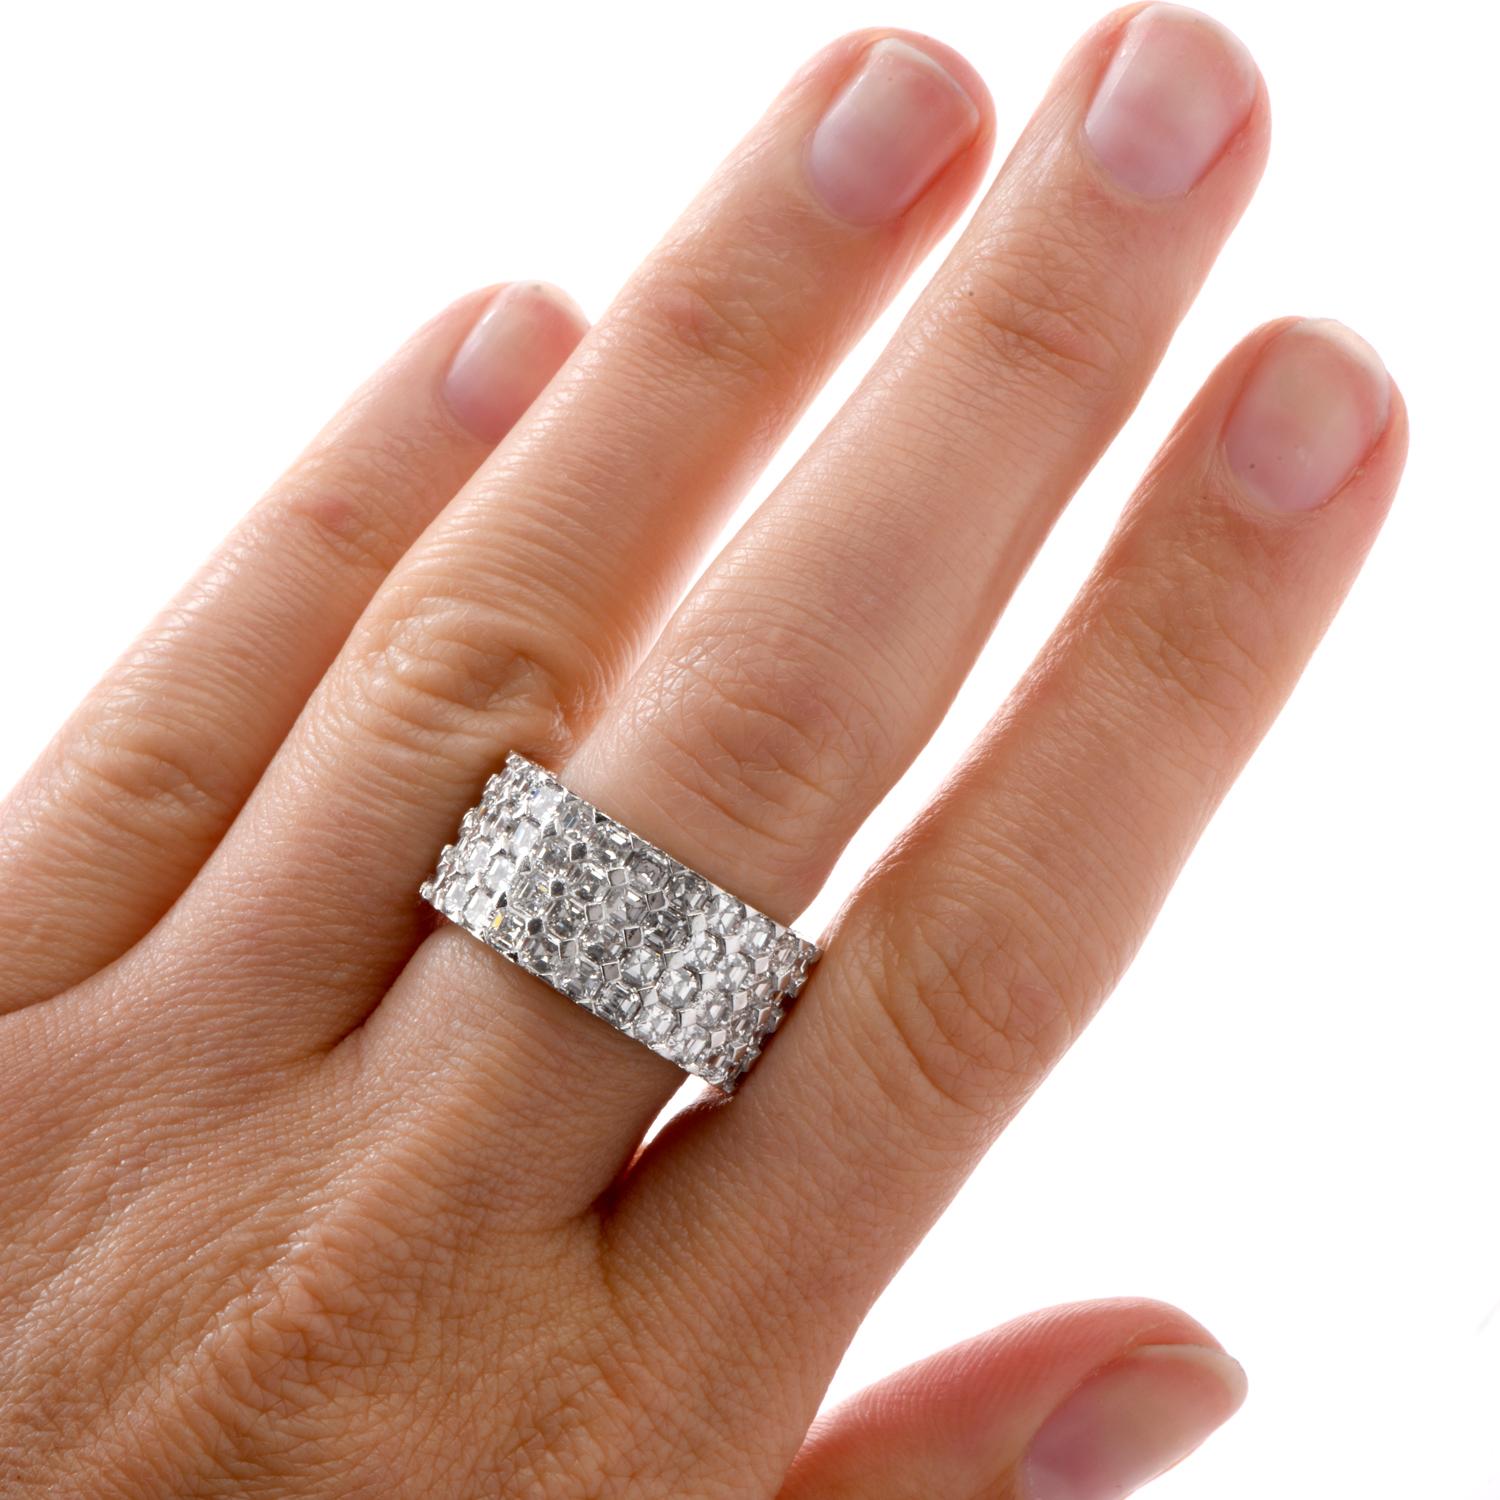 This extraordinary one-of-a-kind J. Stella designed wide eternity band was crafted in 

Luxurious Platinum. 104 Asscher cut diamonds run 4 in a row completely

around this band while 40 round diamonds are prong set

on each side of the